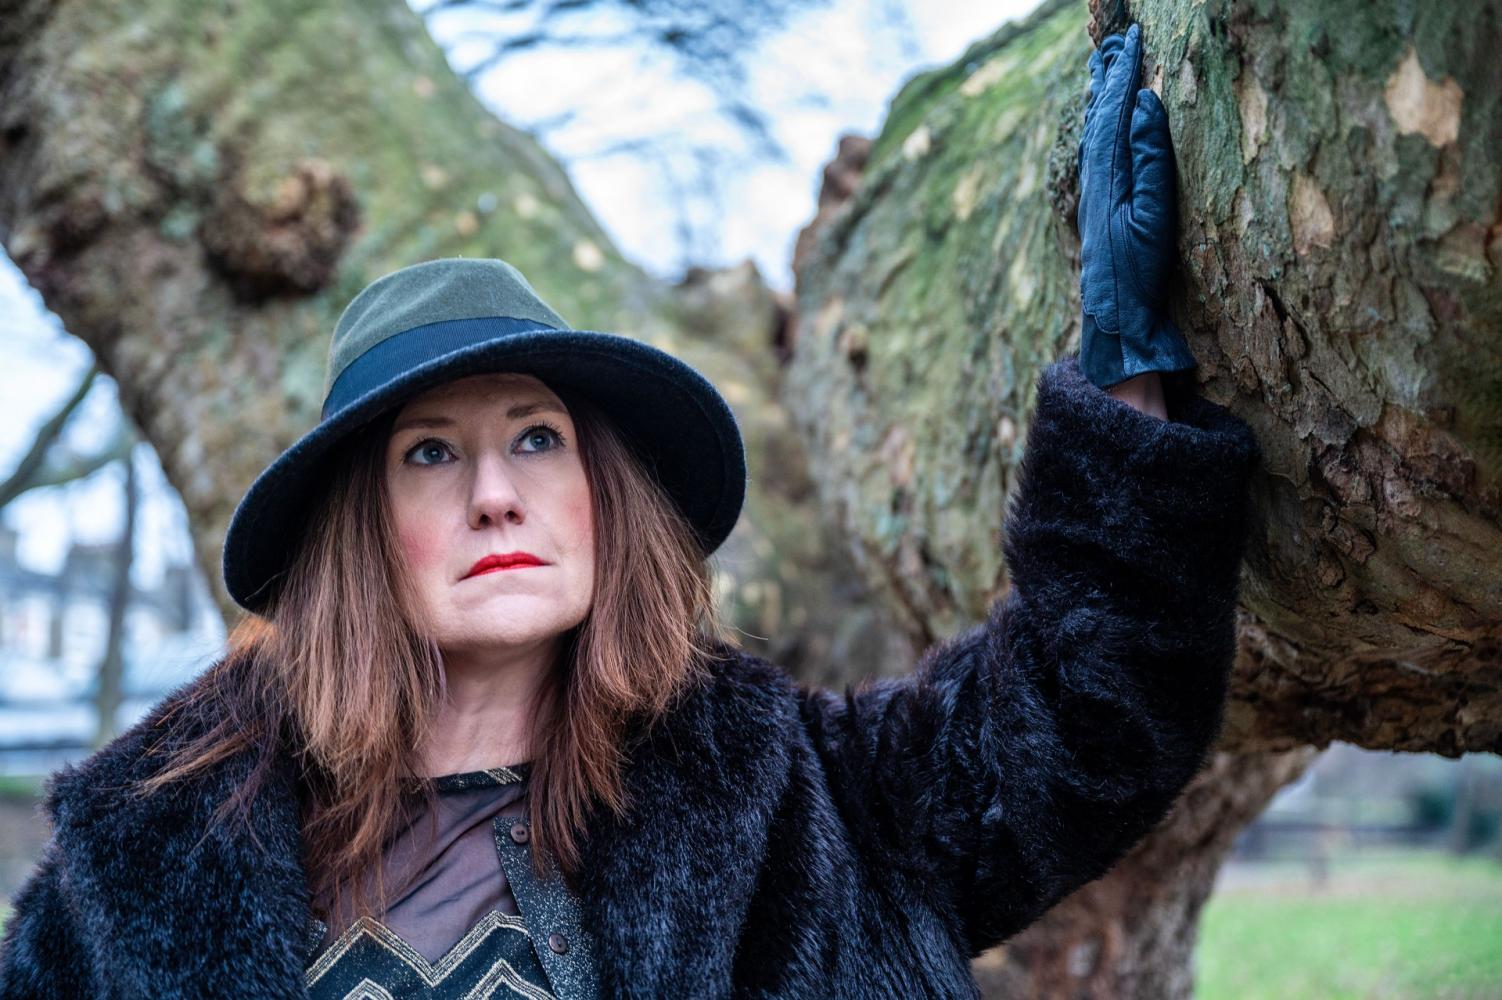 Alison Cotton wearing hat by a tree